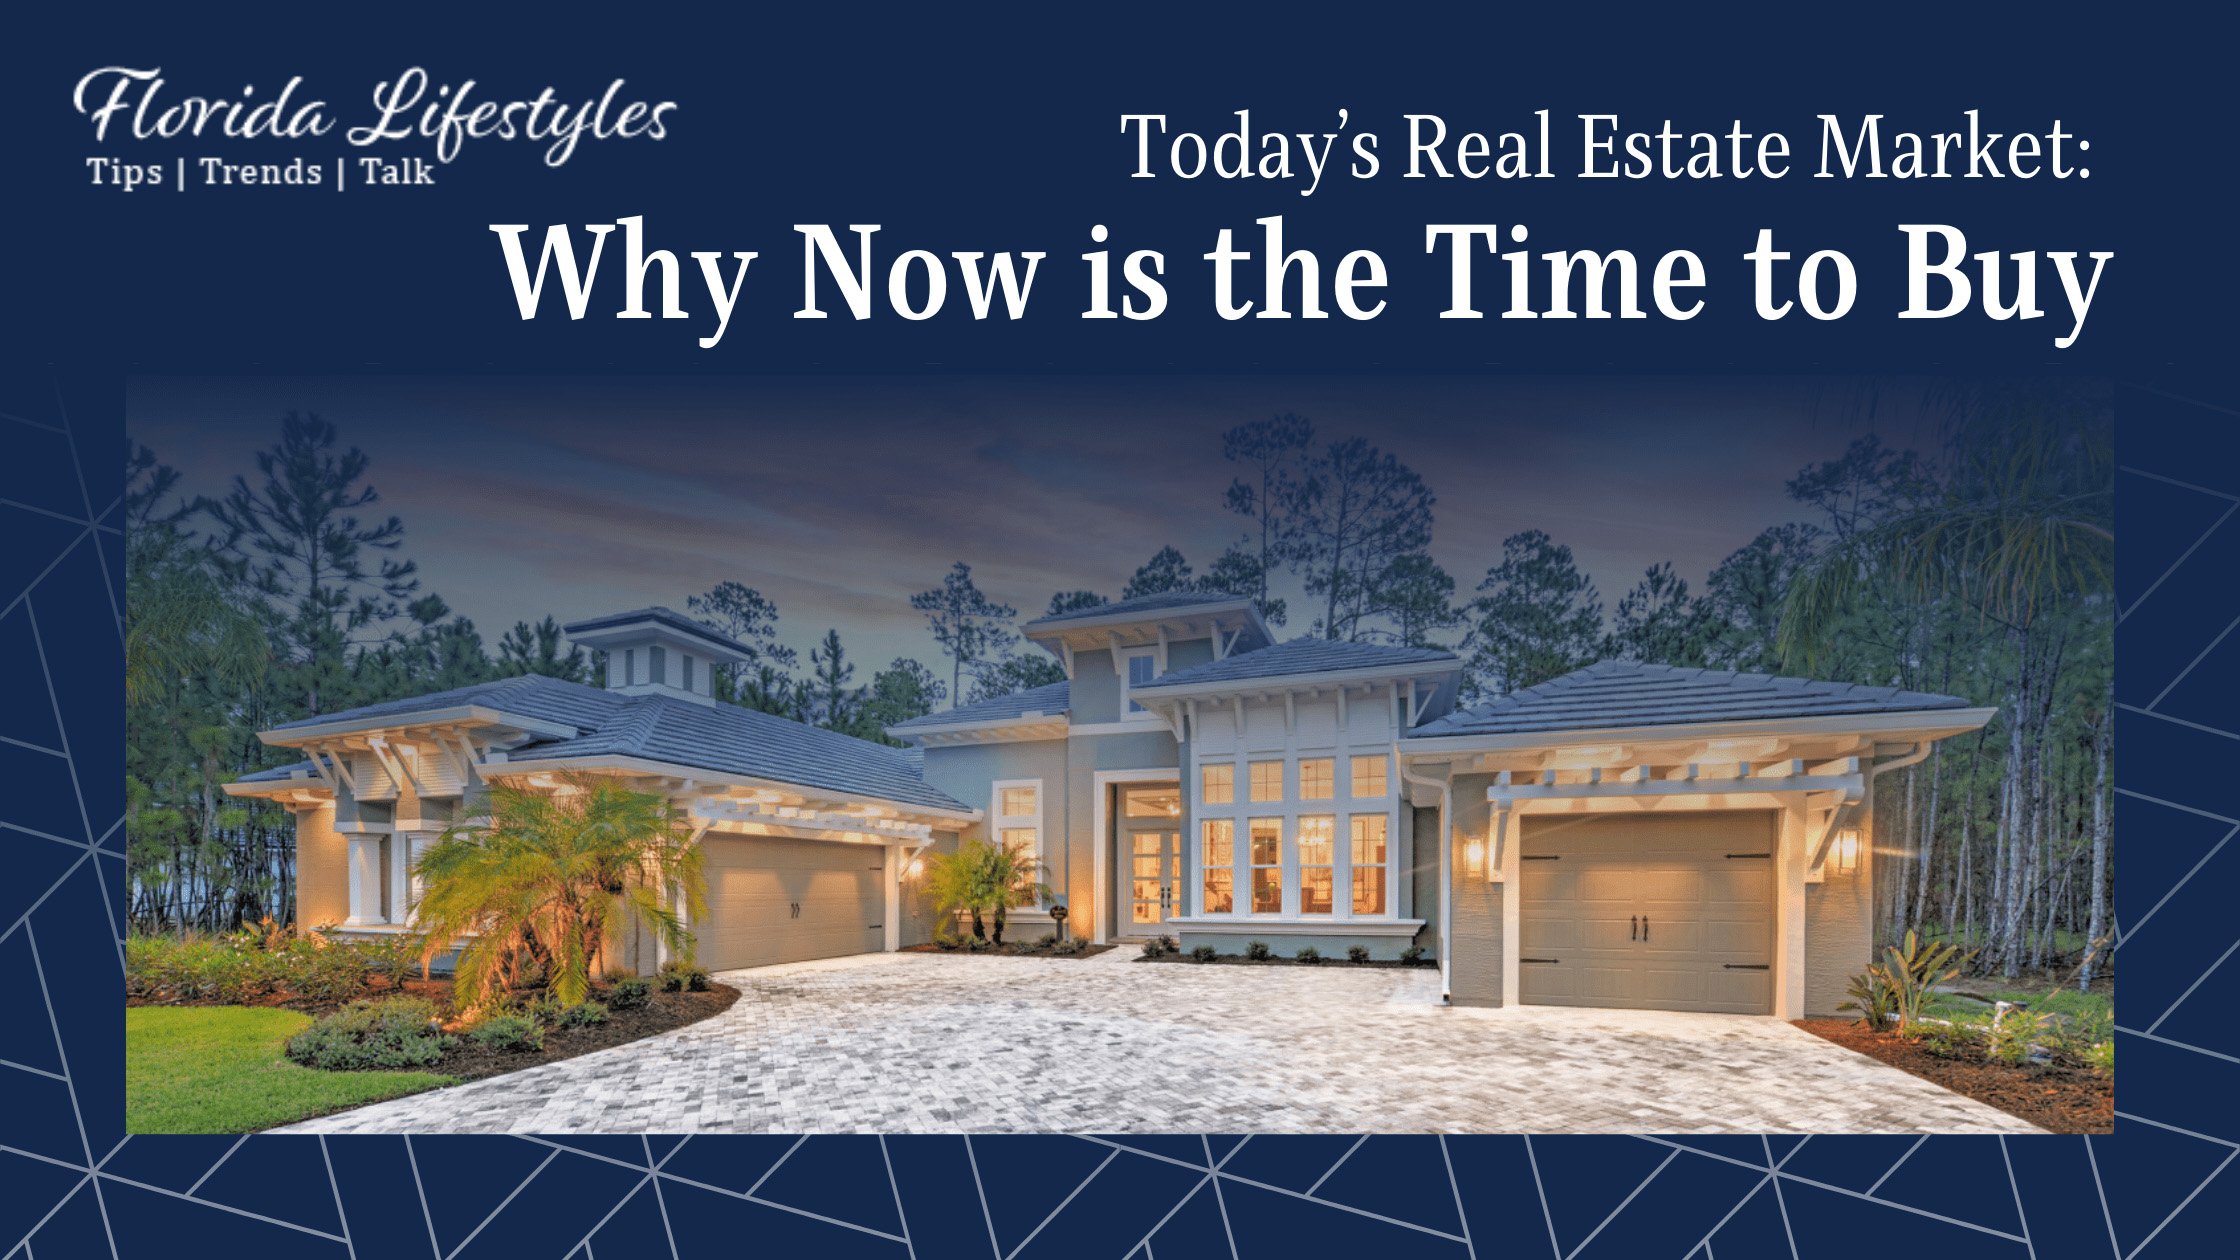 Today’s Real Estate Market: Why Now is the Time to Buy - Todays Market Why Now if the time to buy